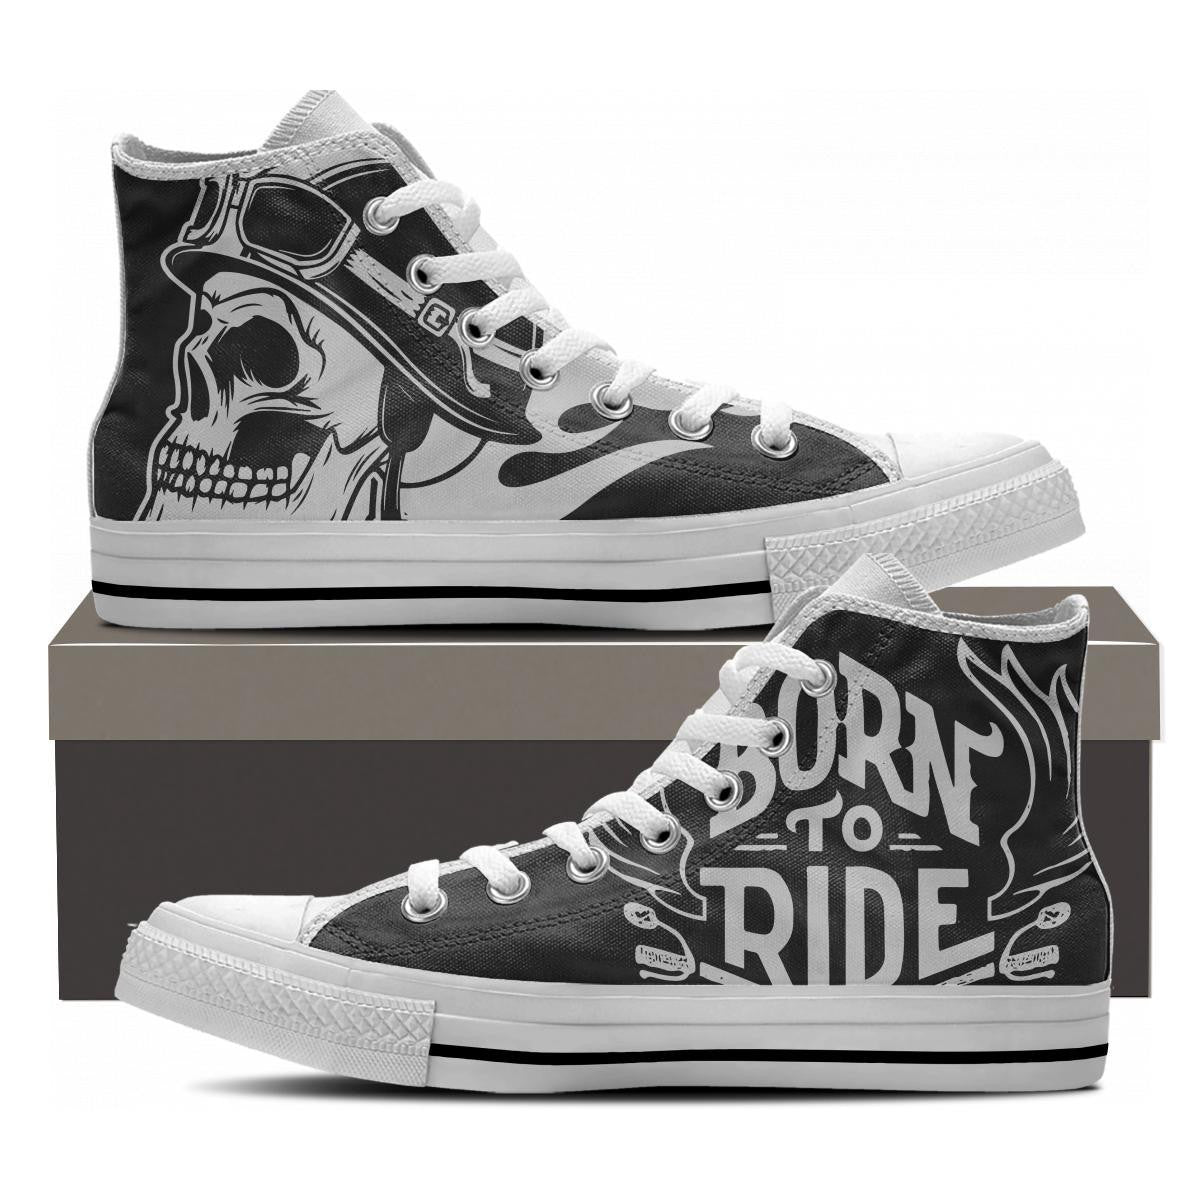 Born To Ride High Tops - Cool Tees and Things